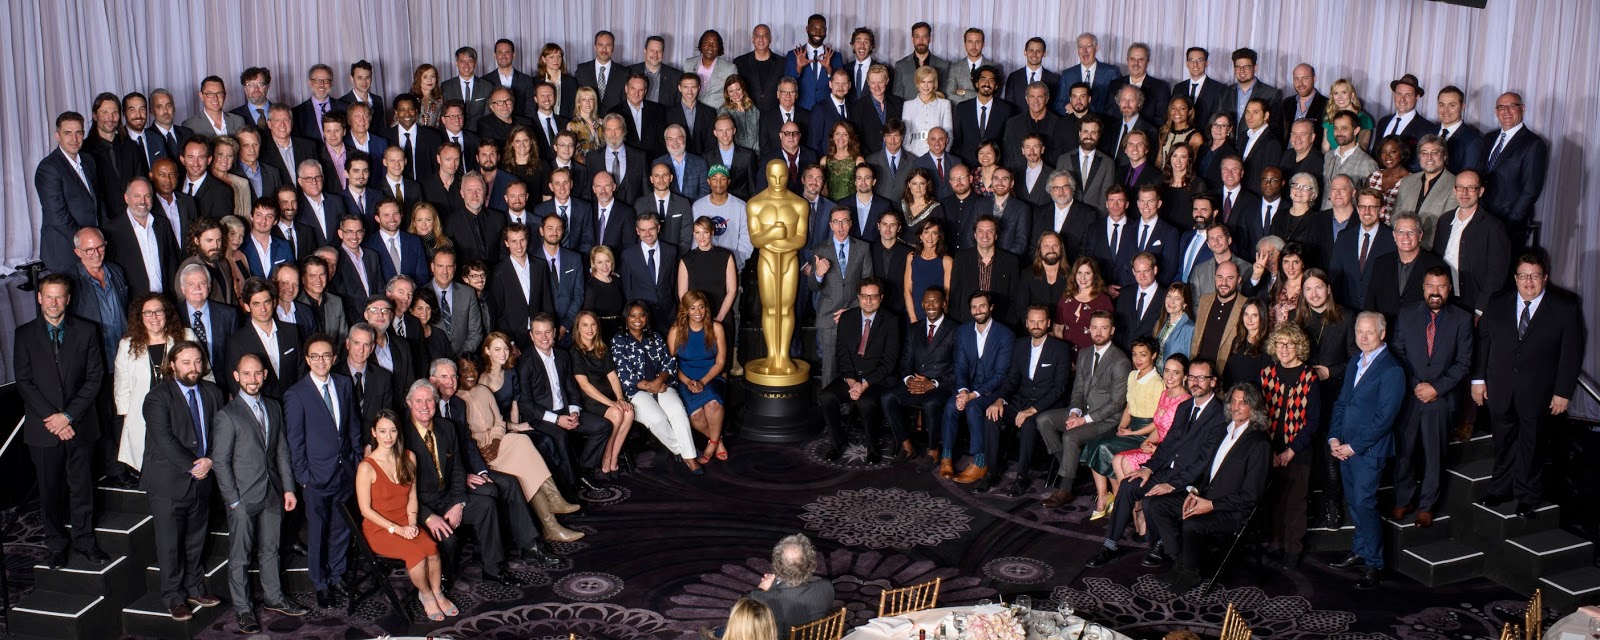 Nominees for the 89th Oscars® were celebrated at a luncheon held at the Beverly Hilton, Monday, February 6, 2017. The 89th Oscars will air on Sunday, February 26, live on ABC.